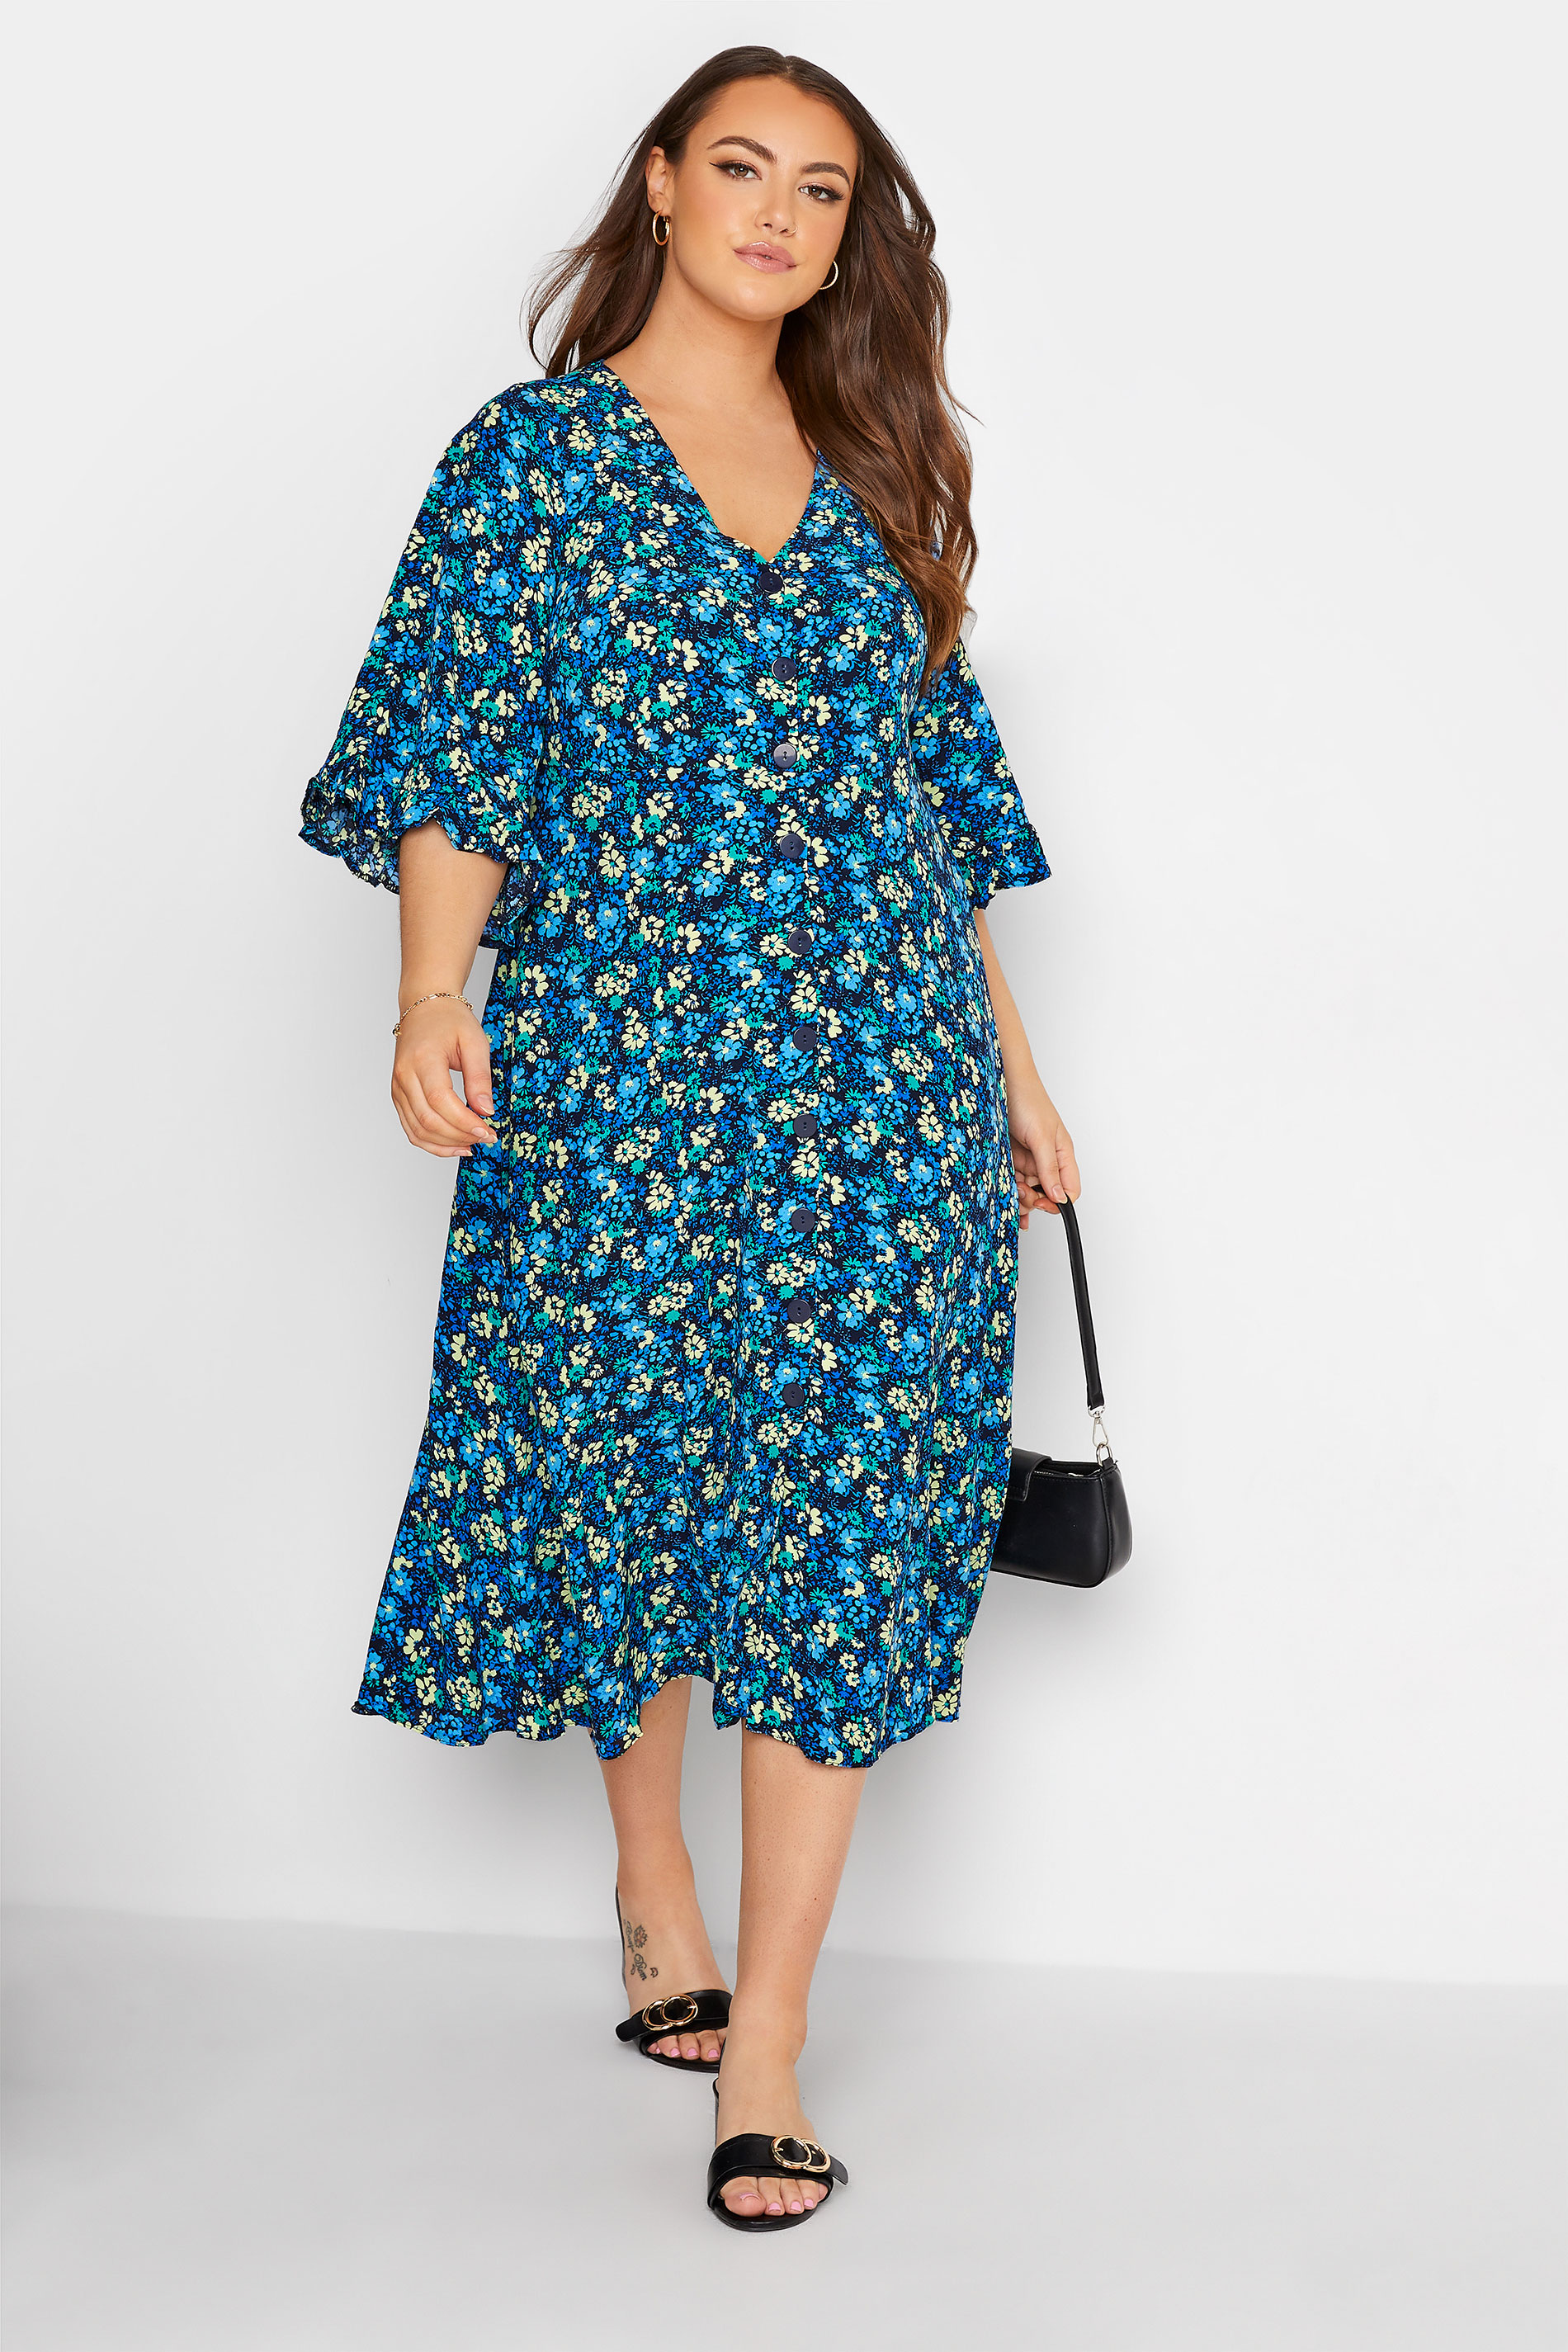 LIMITED COLLECTION Plus Size Blue Floral Midaxi Dress | Yours Clothing 1